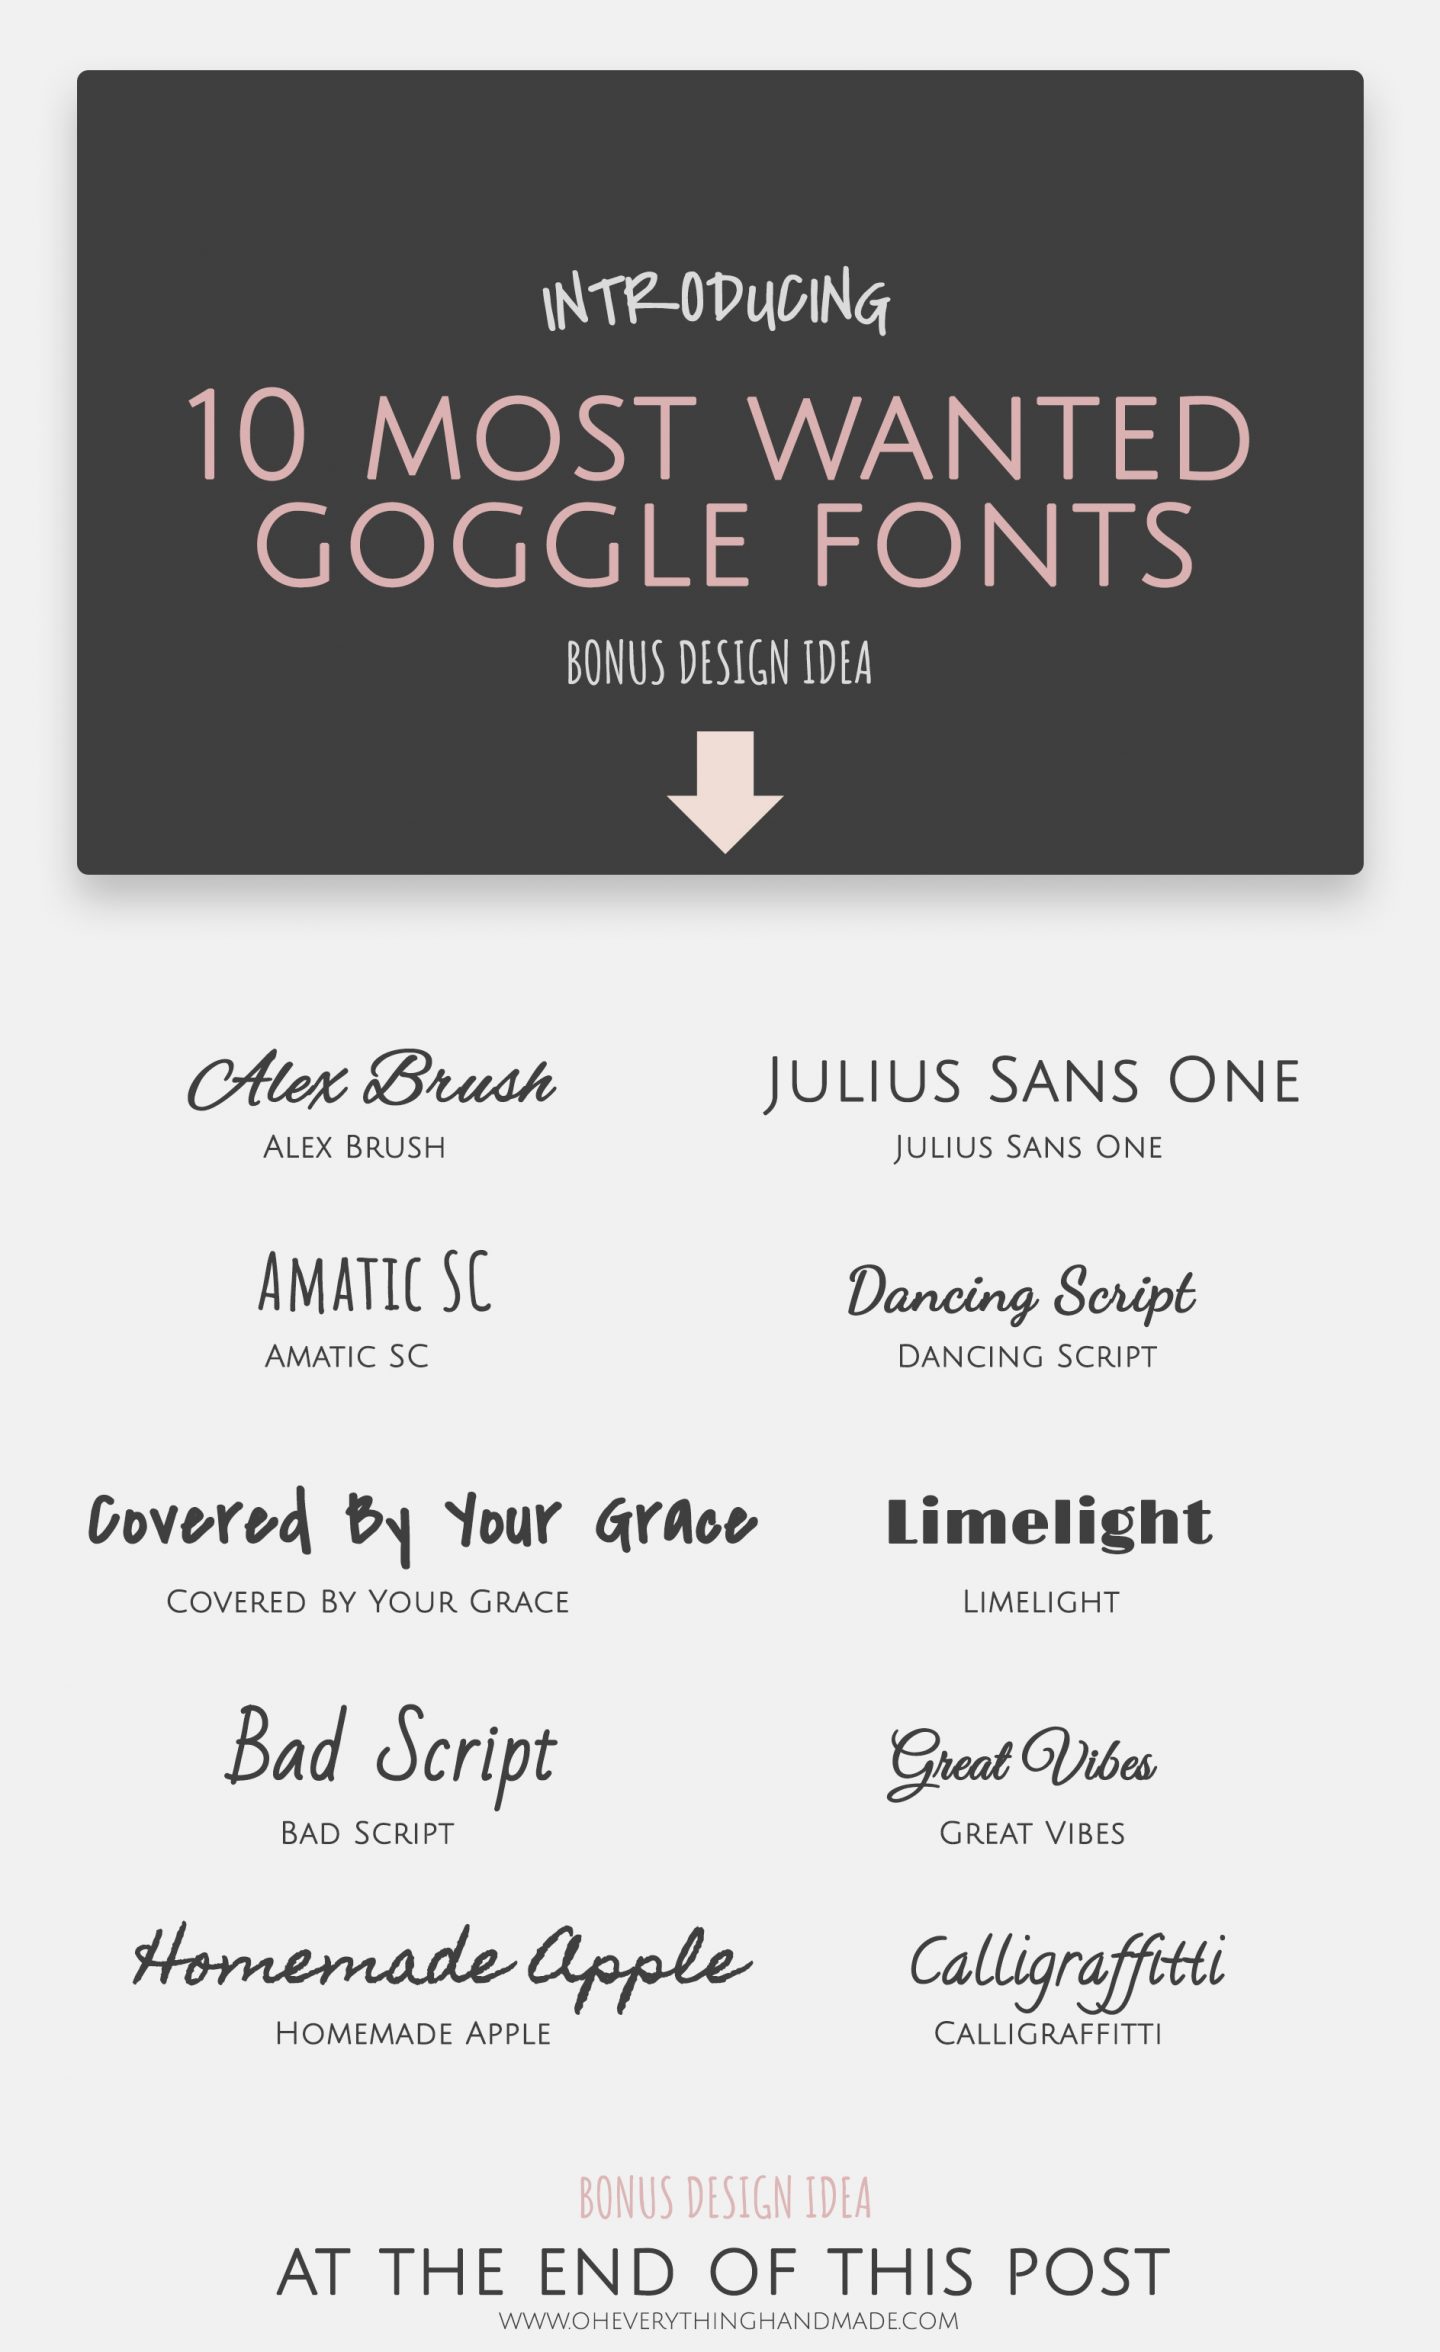 10 Most Wanted Google Fonts